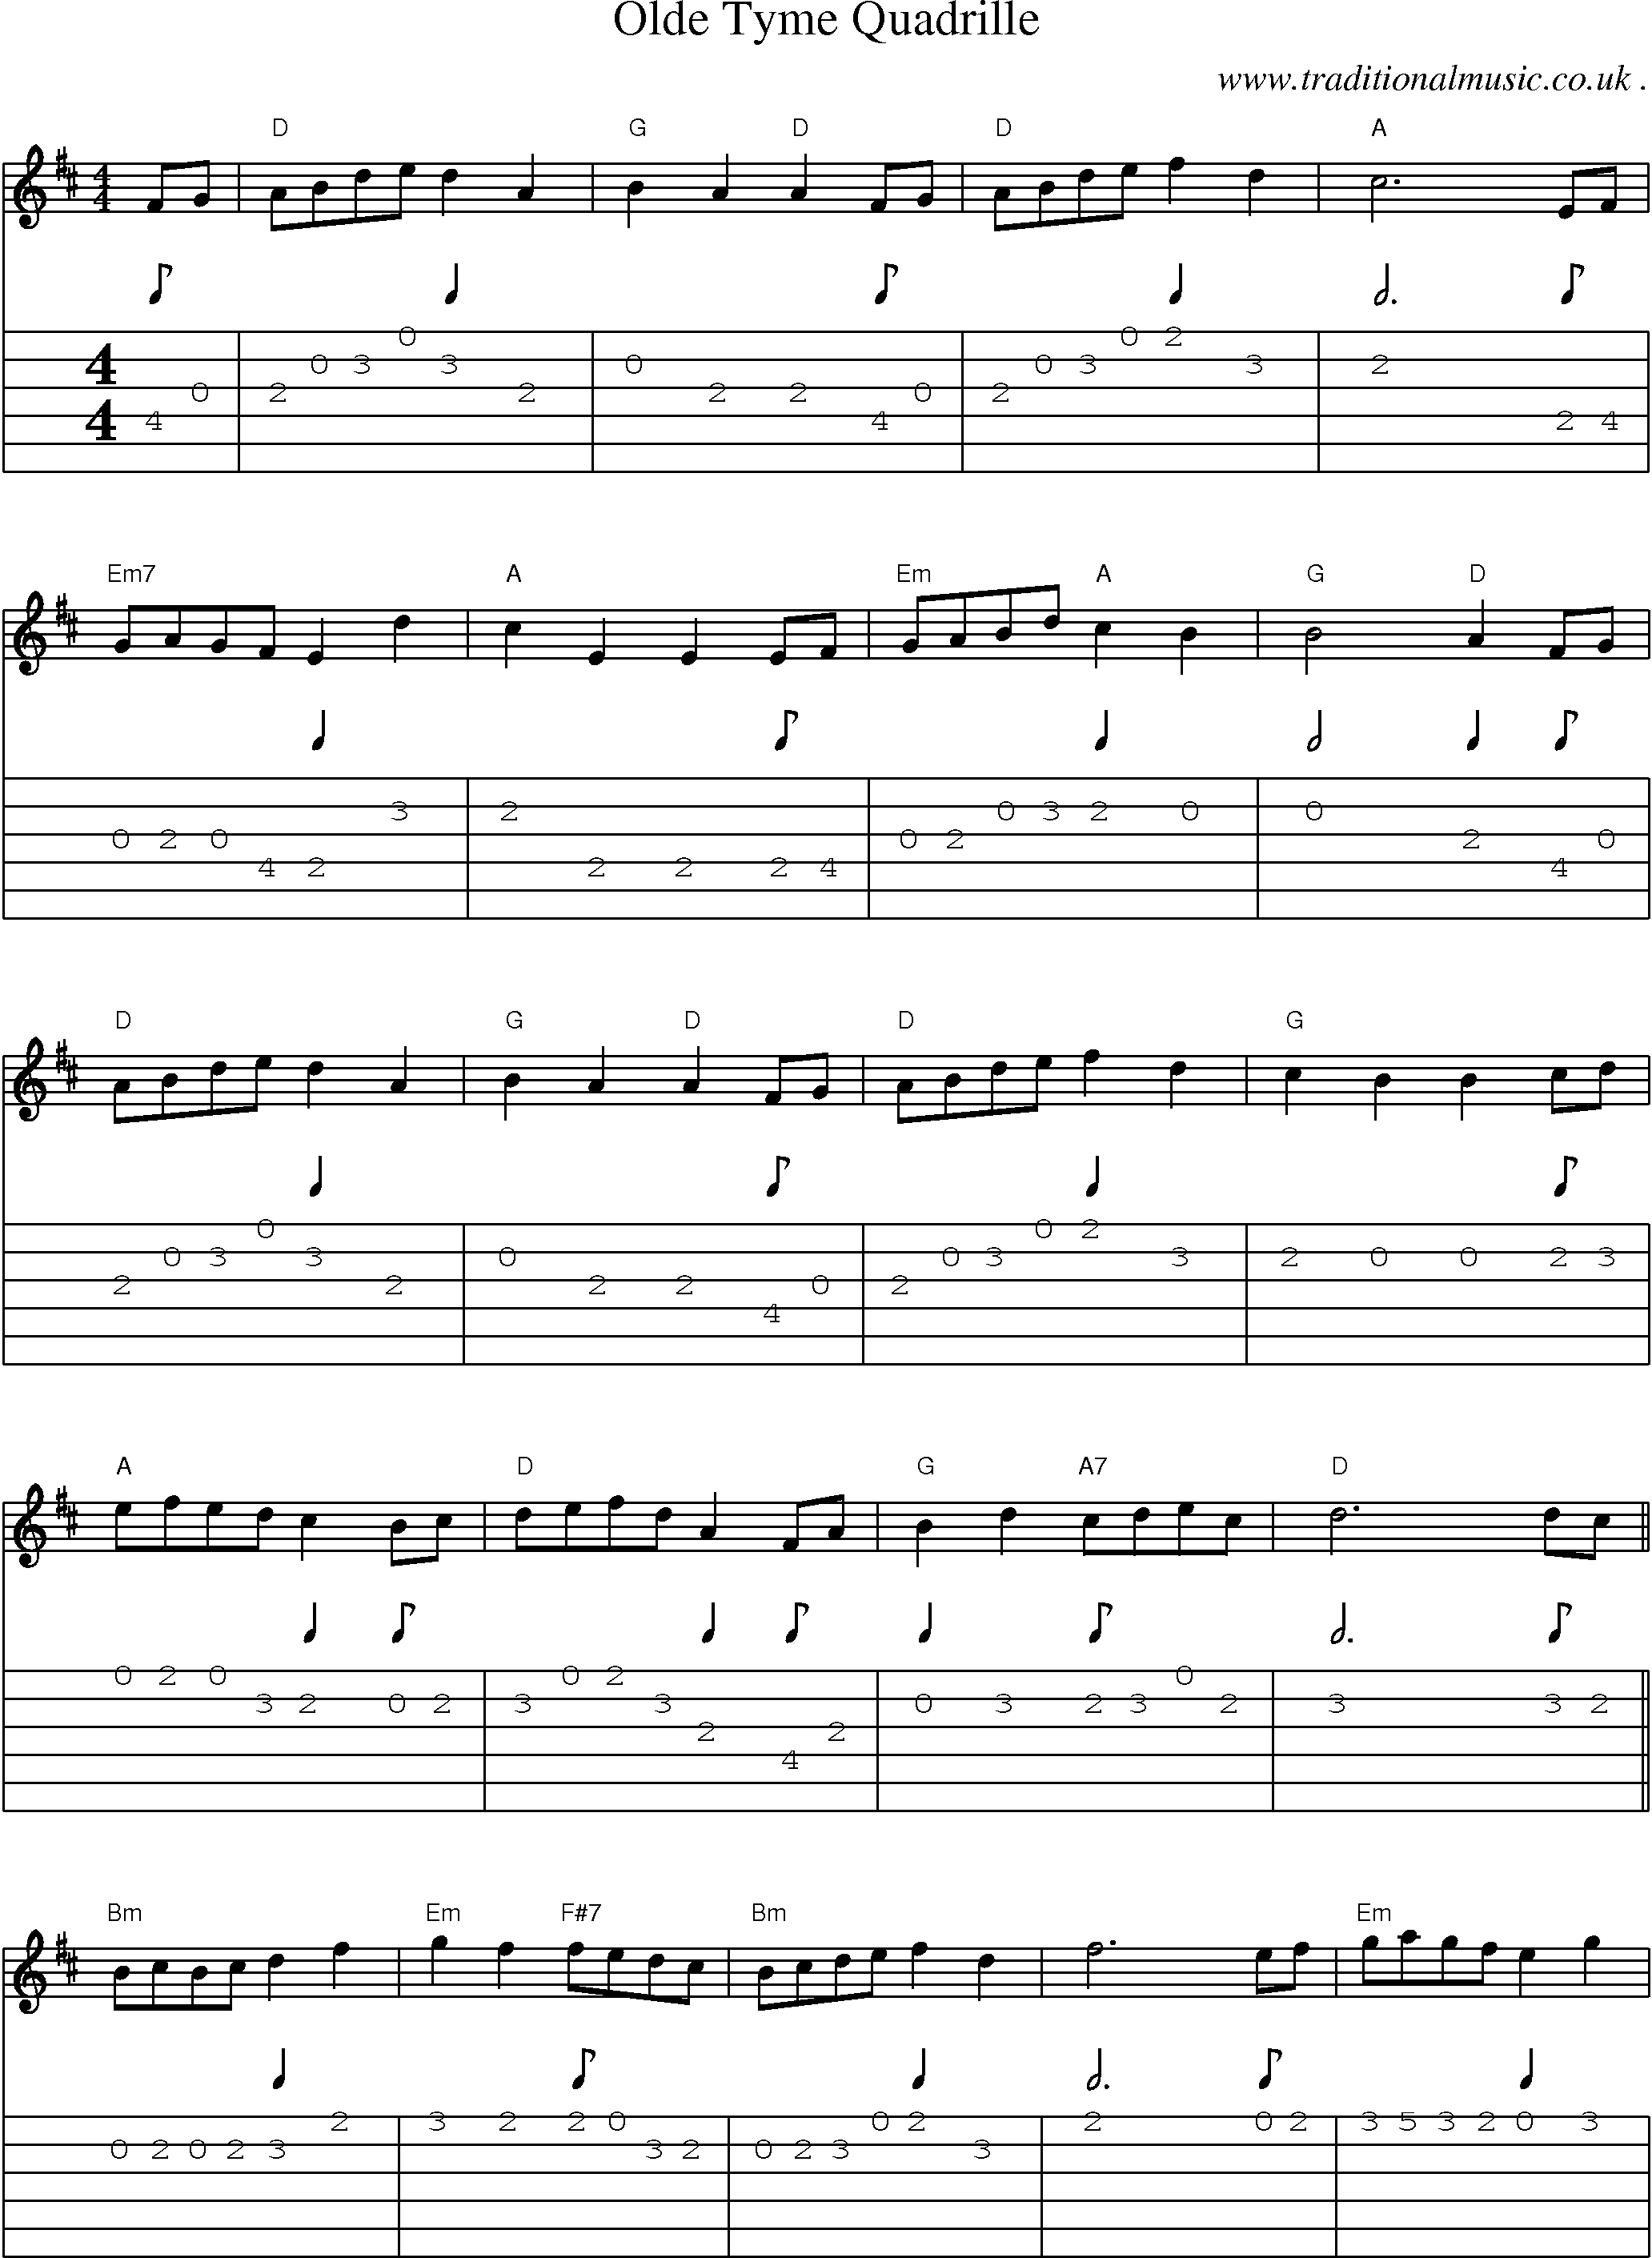 Sheet-Music and Guitar Tabs for Olde Tyme Quadrille